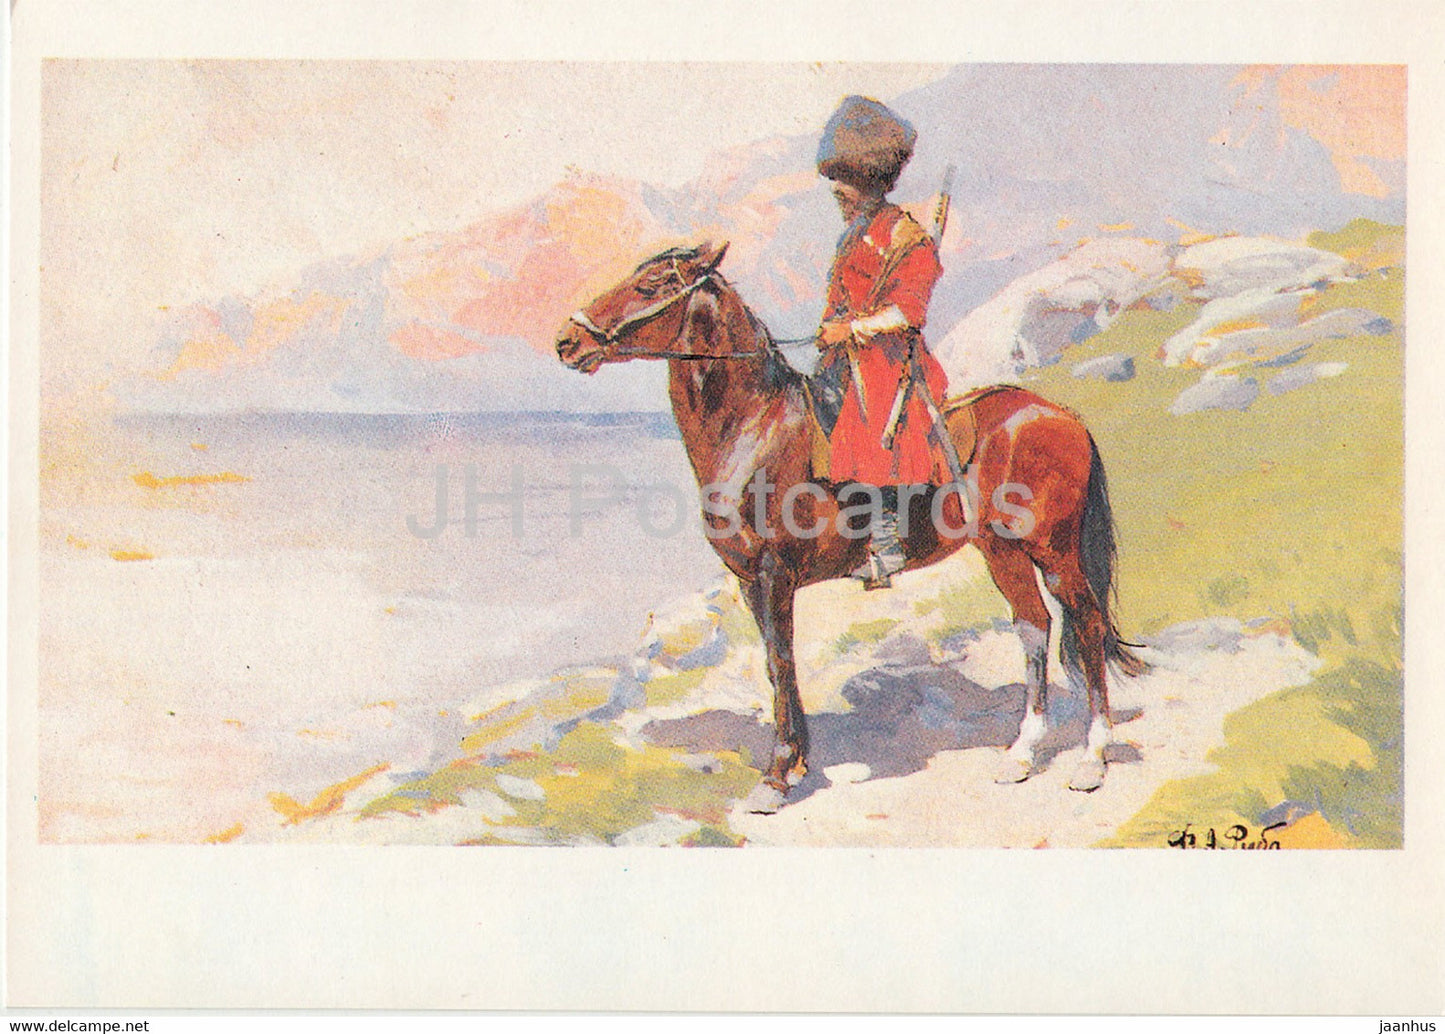 painting by F. Rubo - Kabardian Man - horse - Russian art - 1982 - Russia USSR - unused - JH Postcards